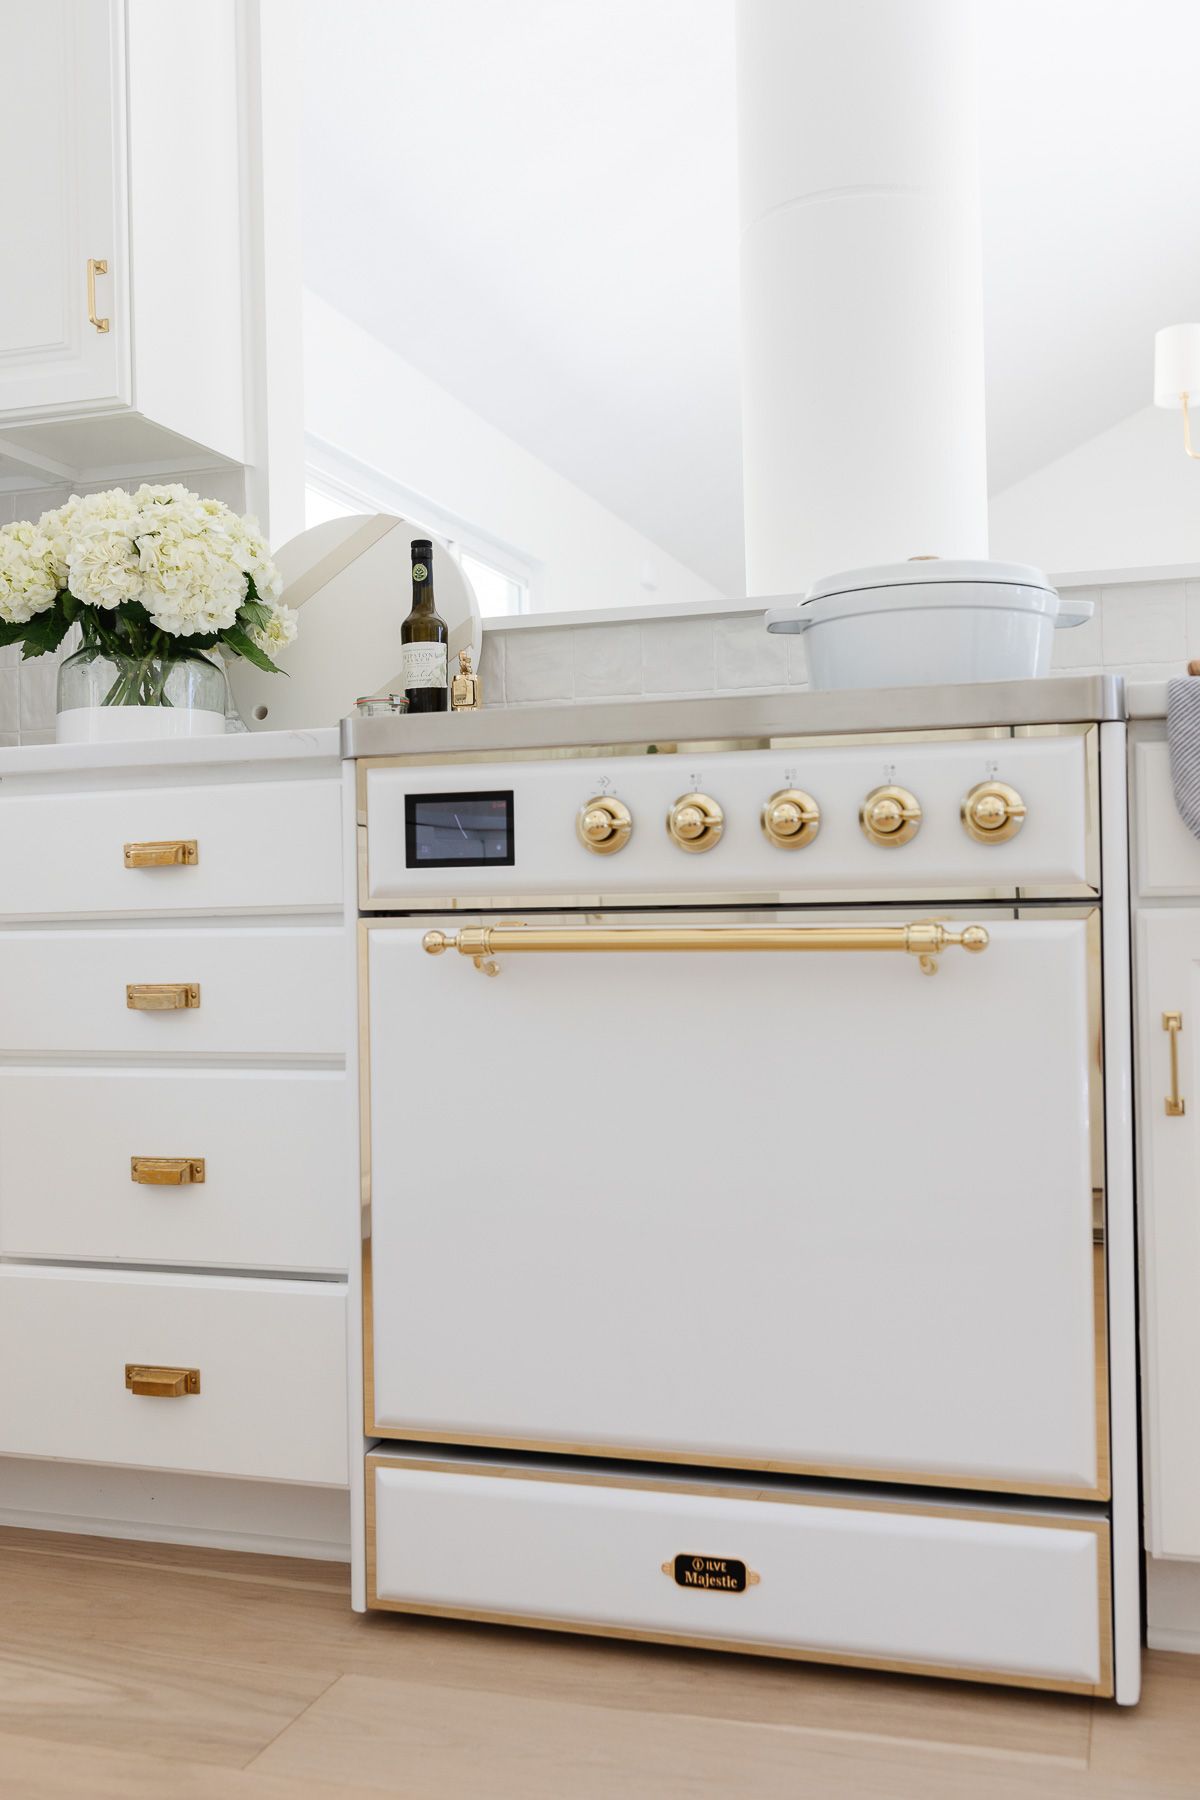 A close up of a white ILVE range in a kitchen with white cabinets and brass hardware